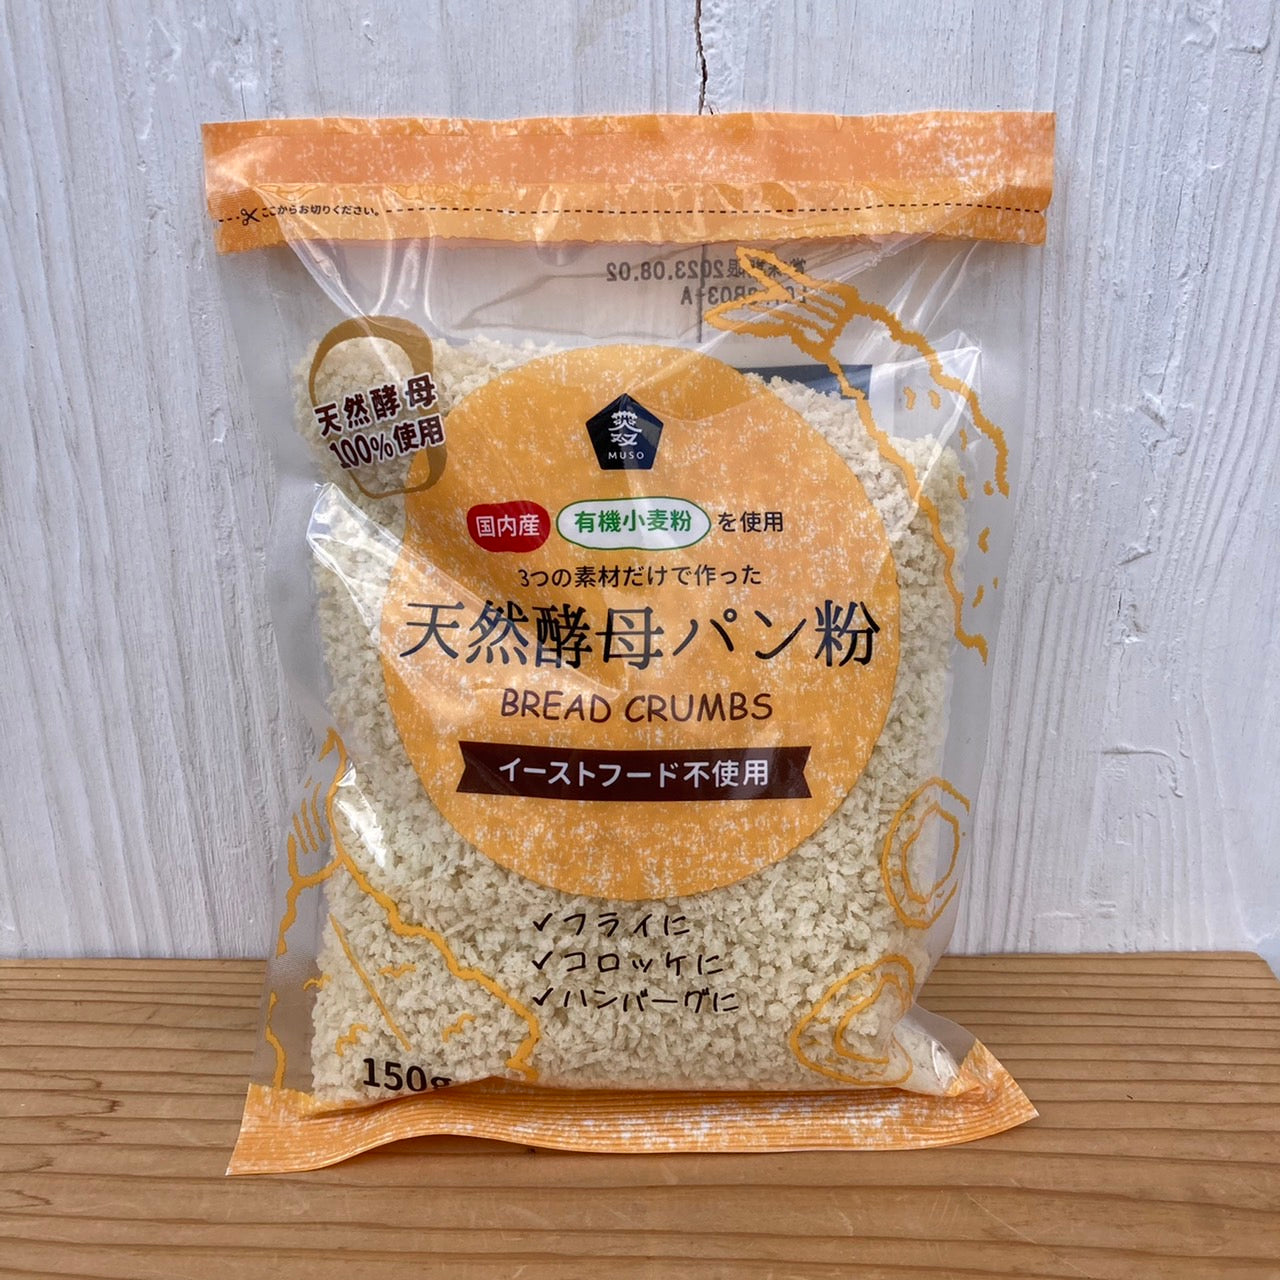 Natural yeast bread crumbs made with domestic organic wheat flour 150g